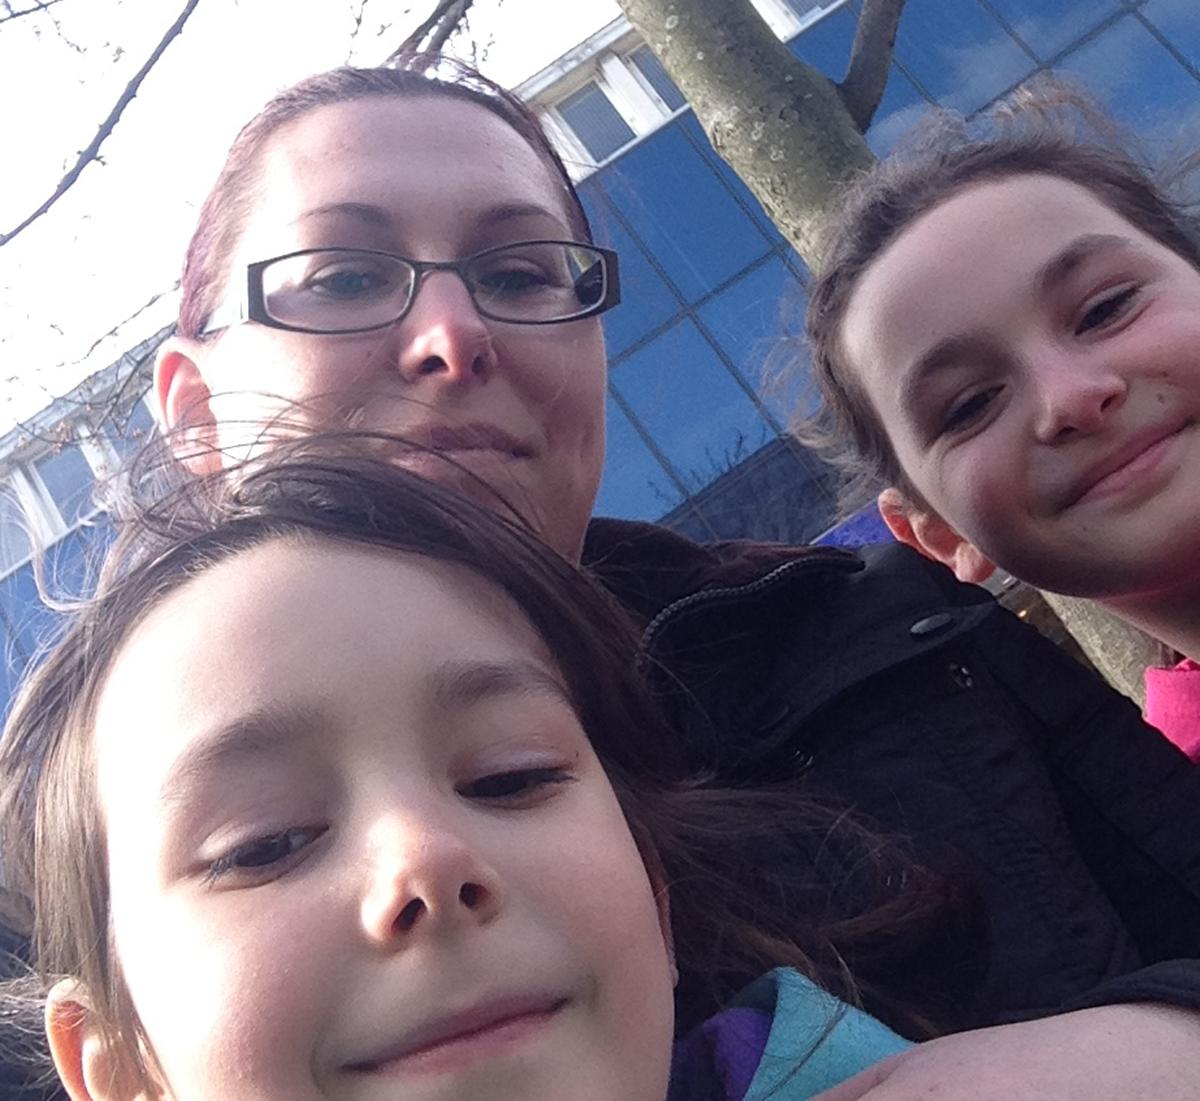 Justyna Wiel Gosz, 23 with her daughters Michalina, 9 and Eva, 6 from Swaythling